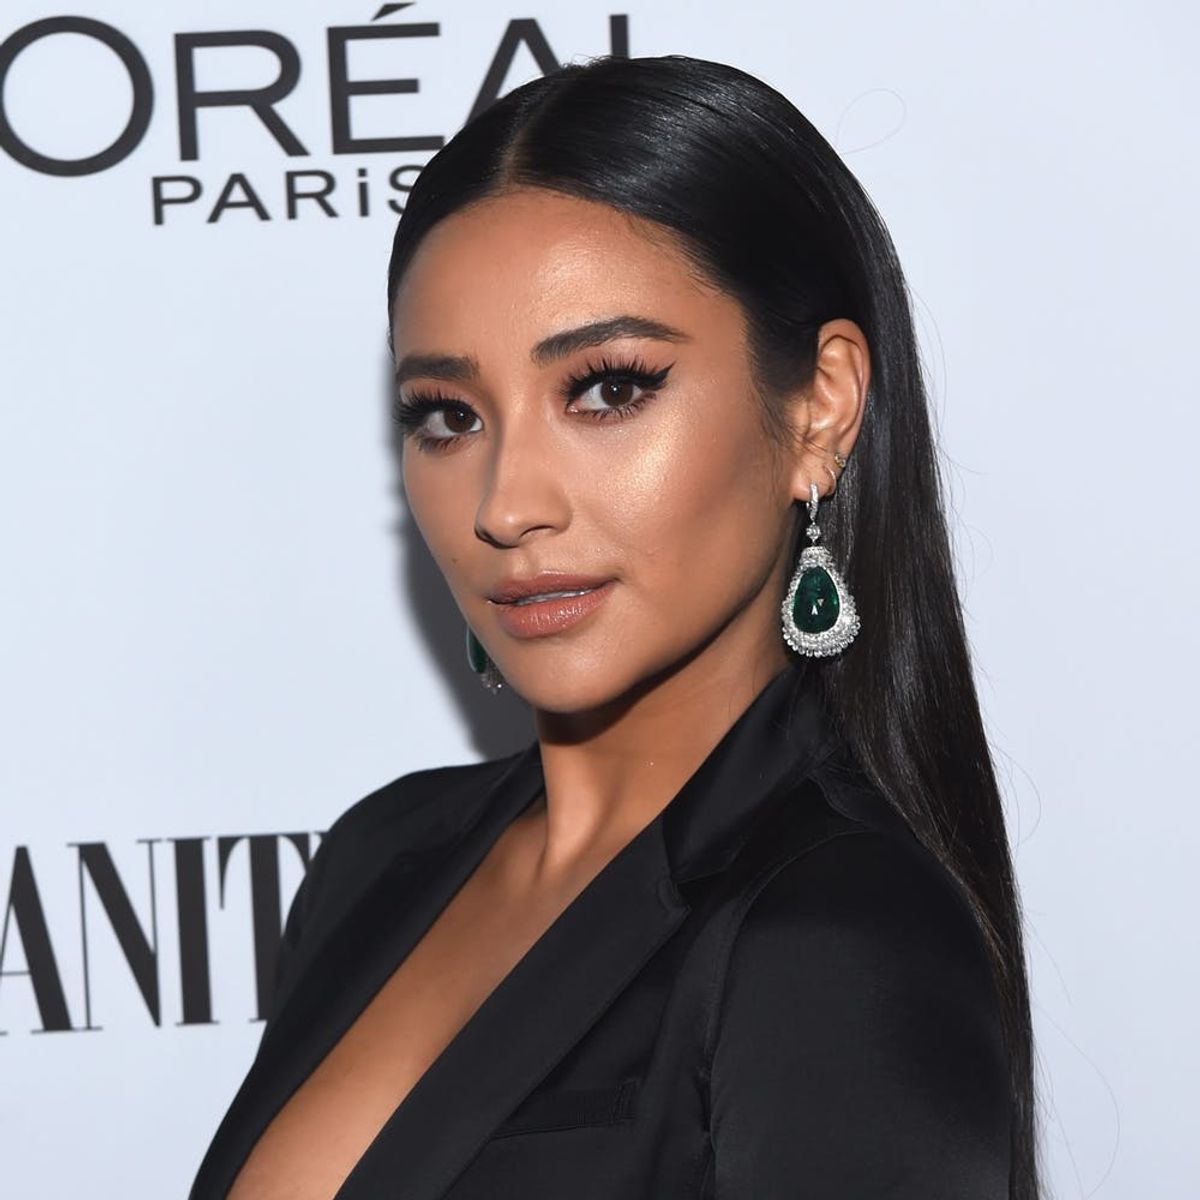 No One Knows What Shay Mitchell’s New Tattoo Means